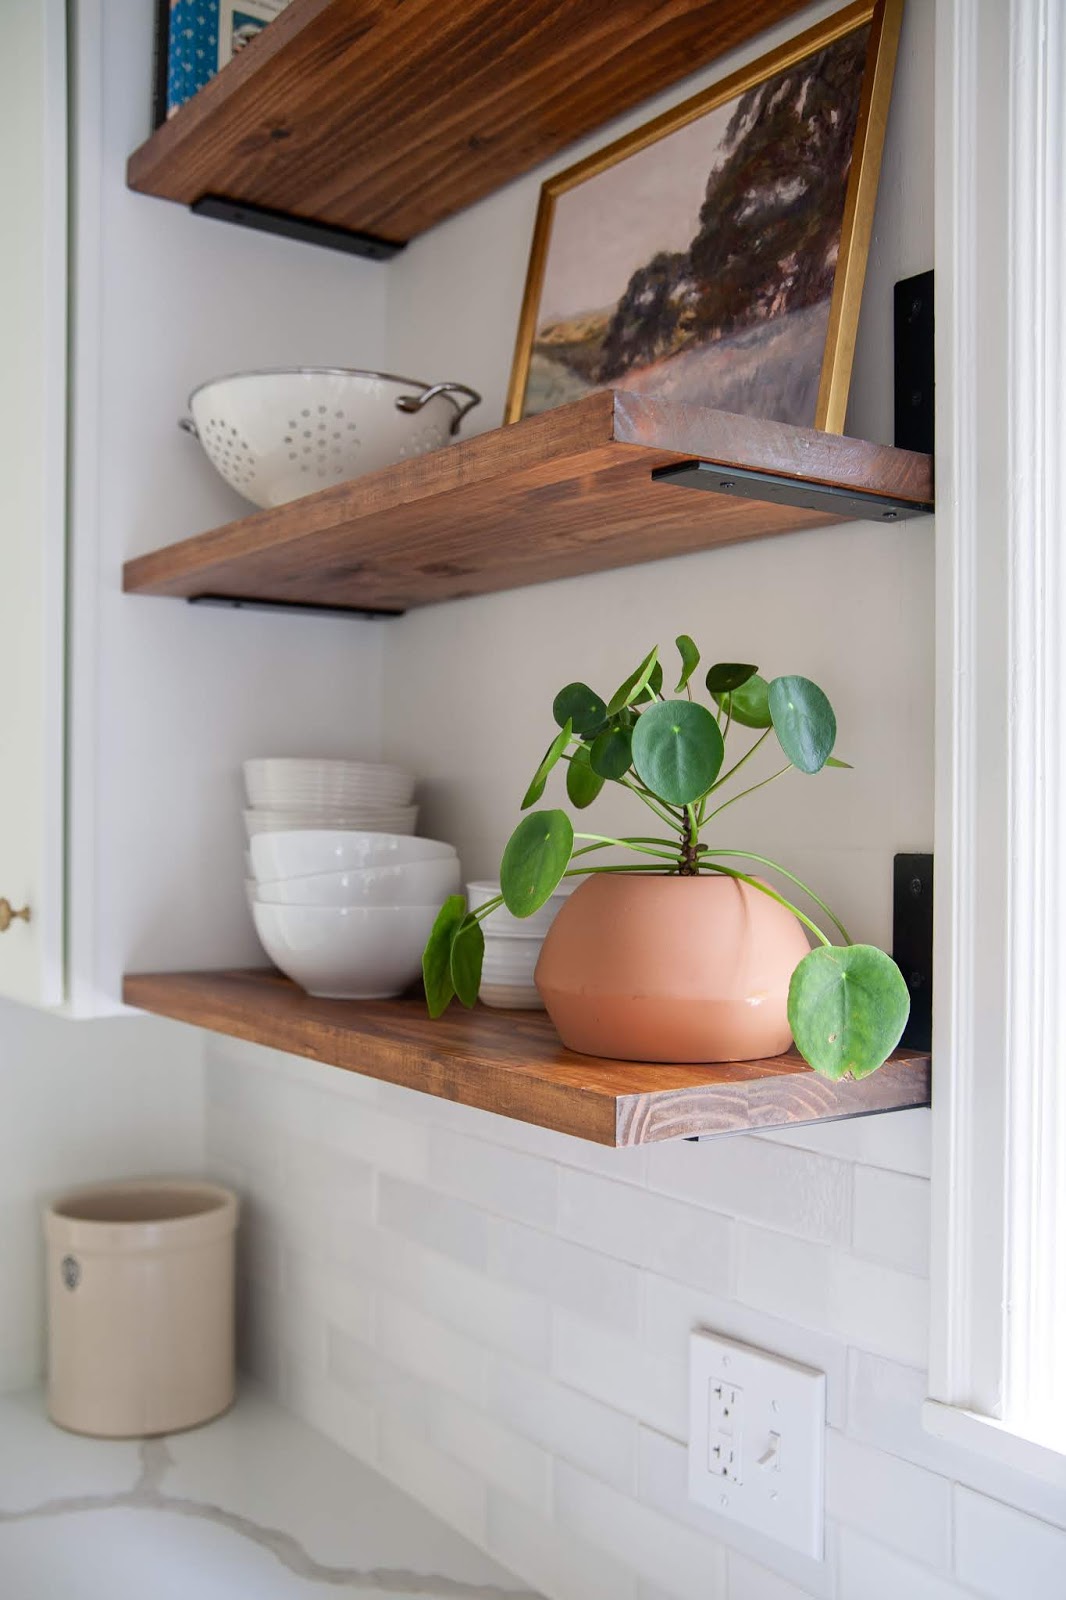 How to Build DIY Floating Shelves for the Kitchen